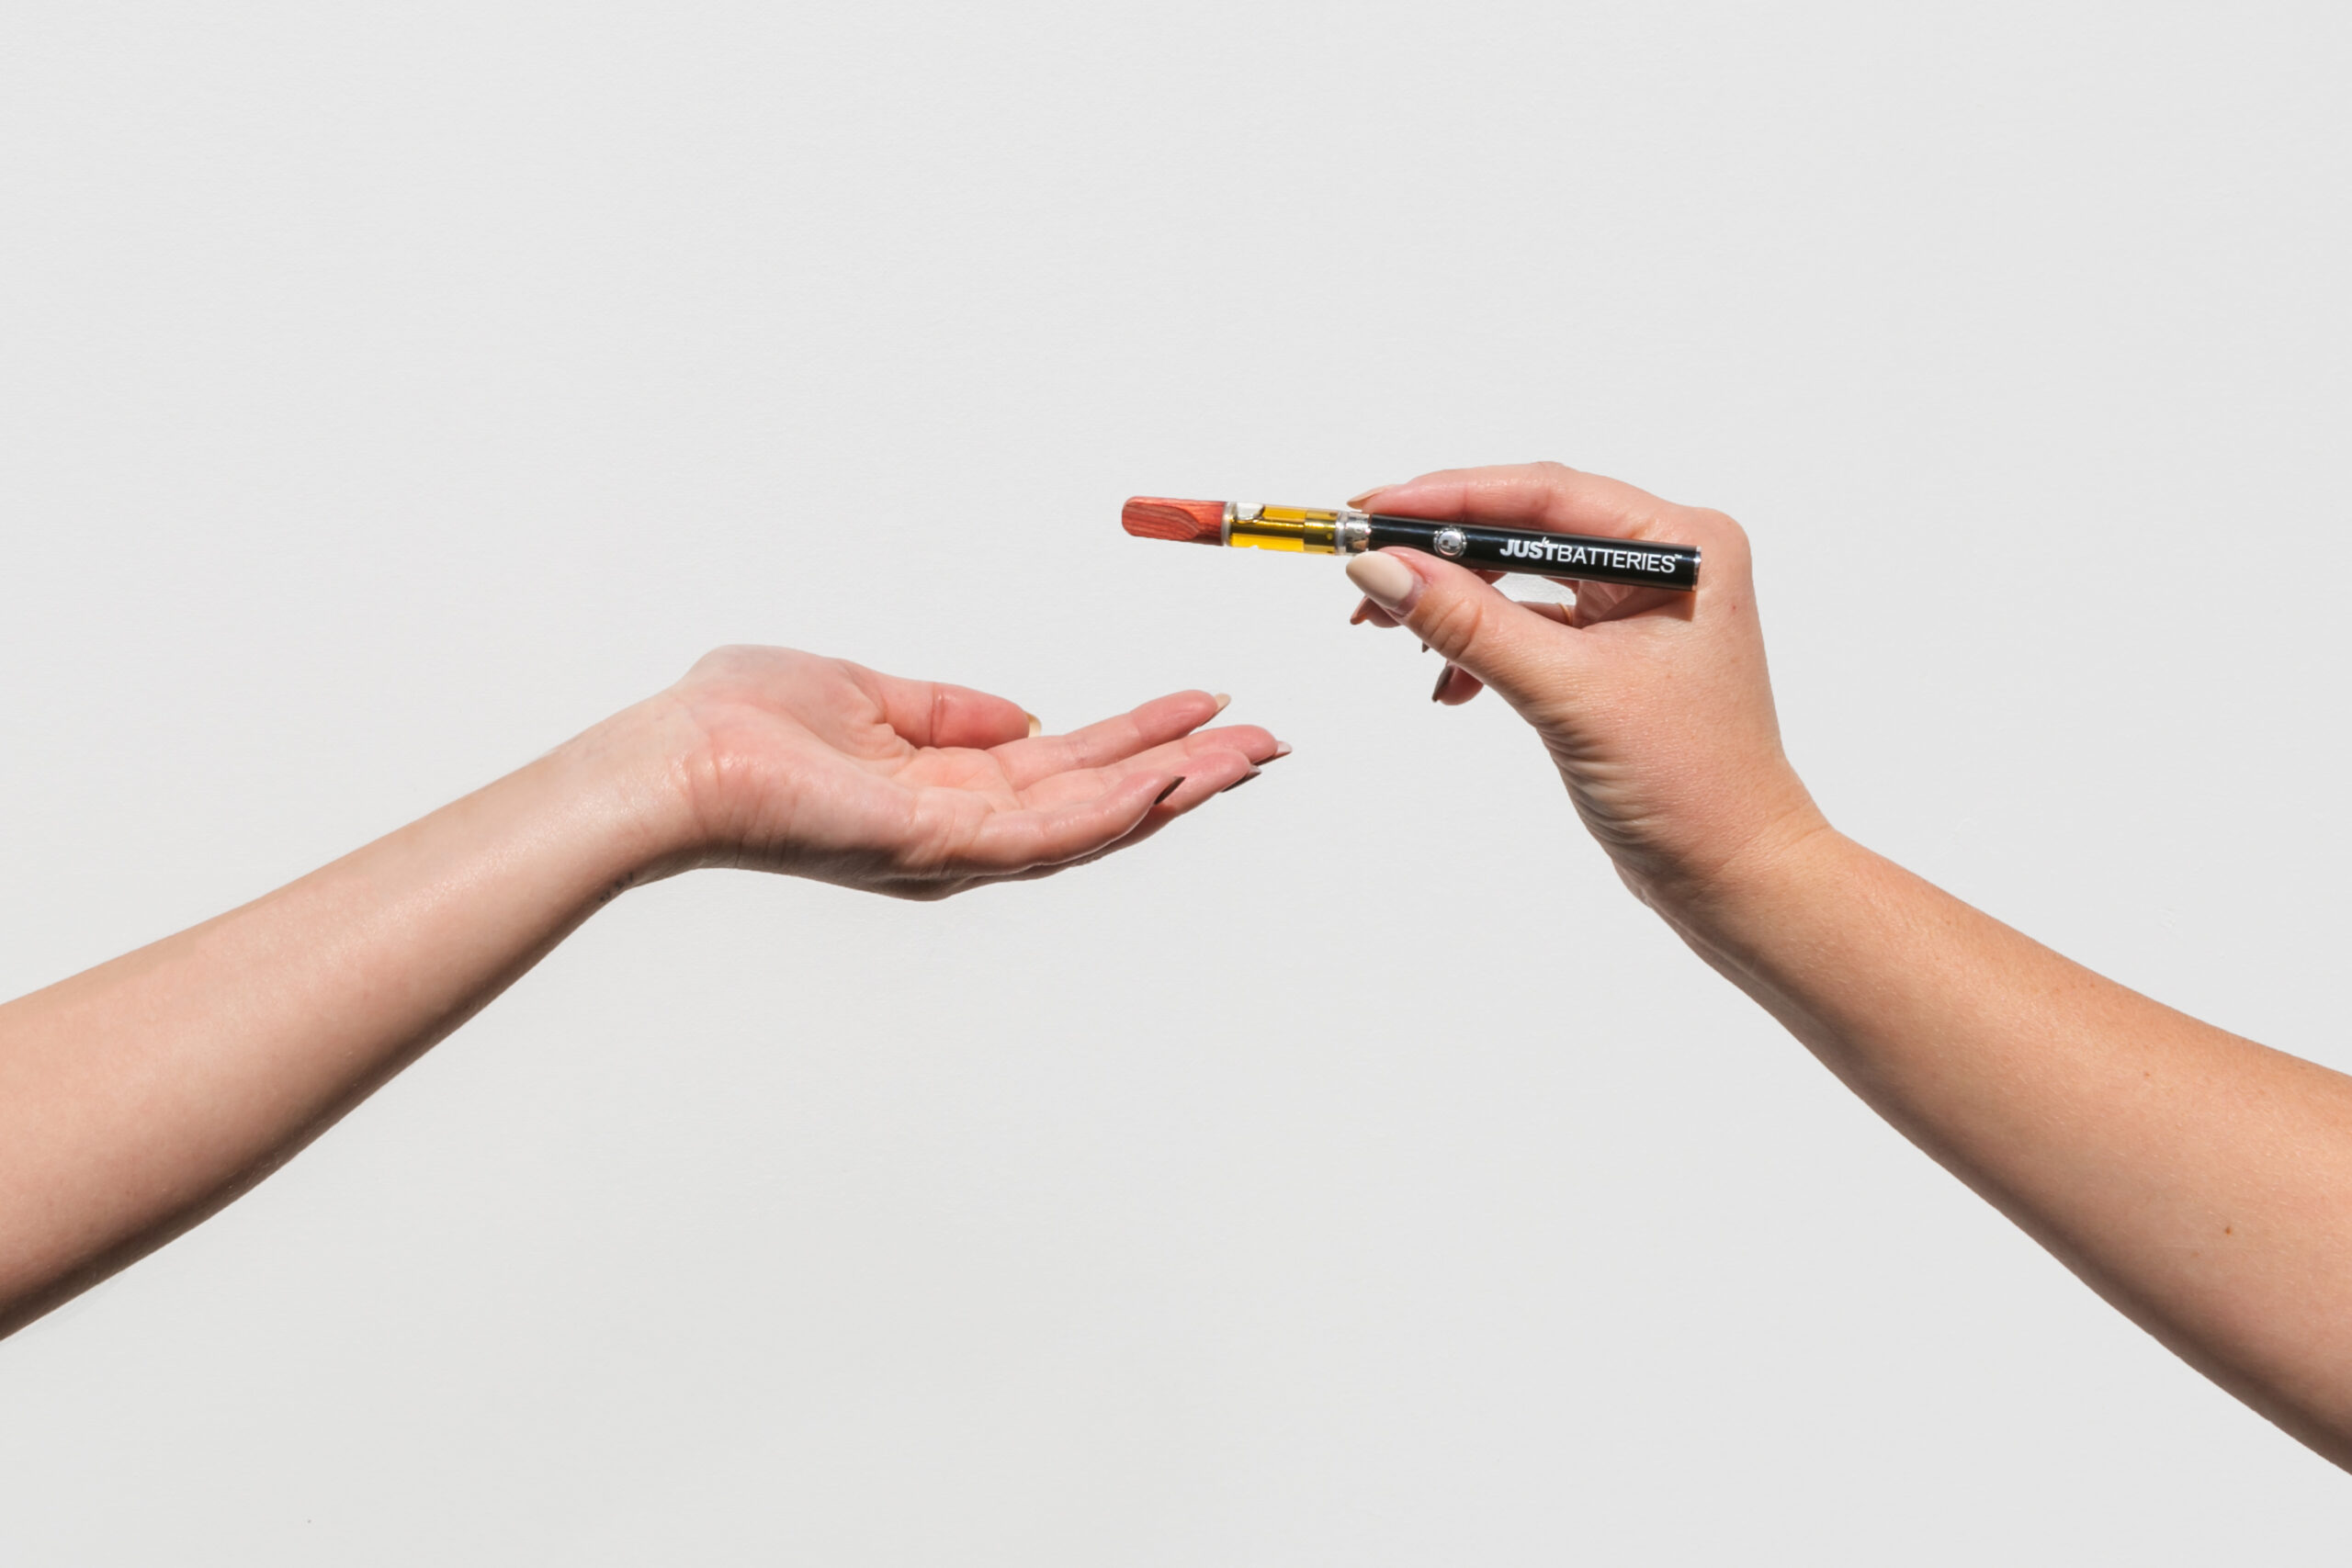 WHAT WATTAGE SHOULD YOU BE VAPING CBD AT